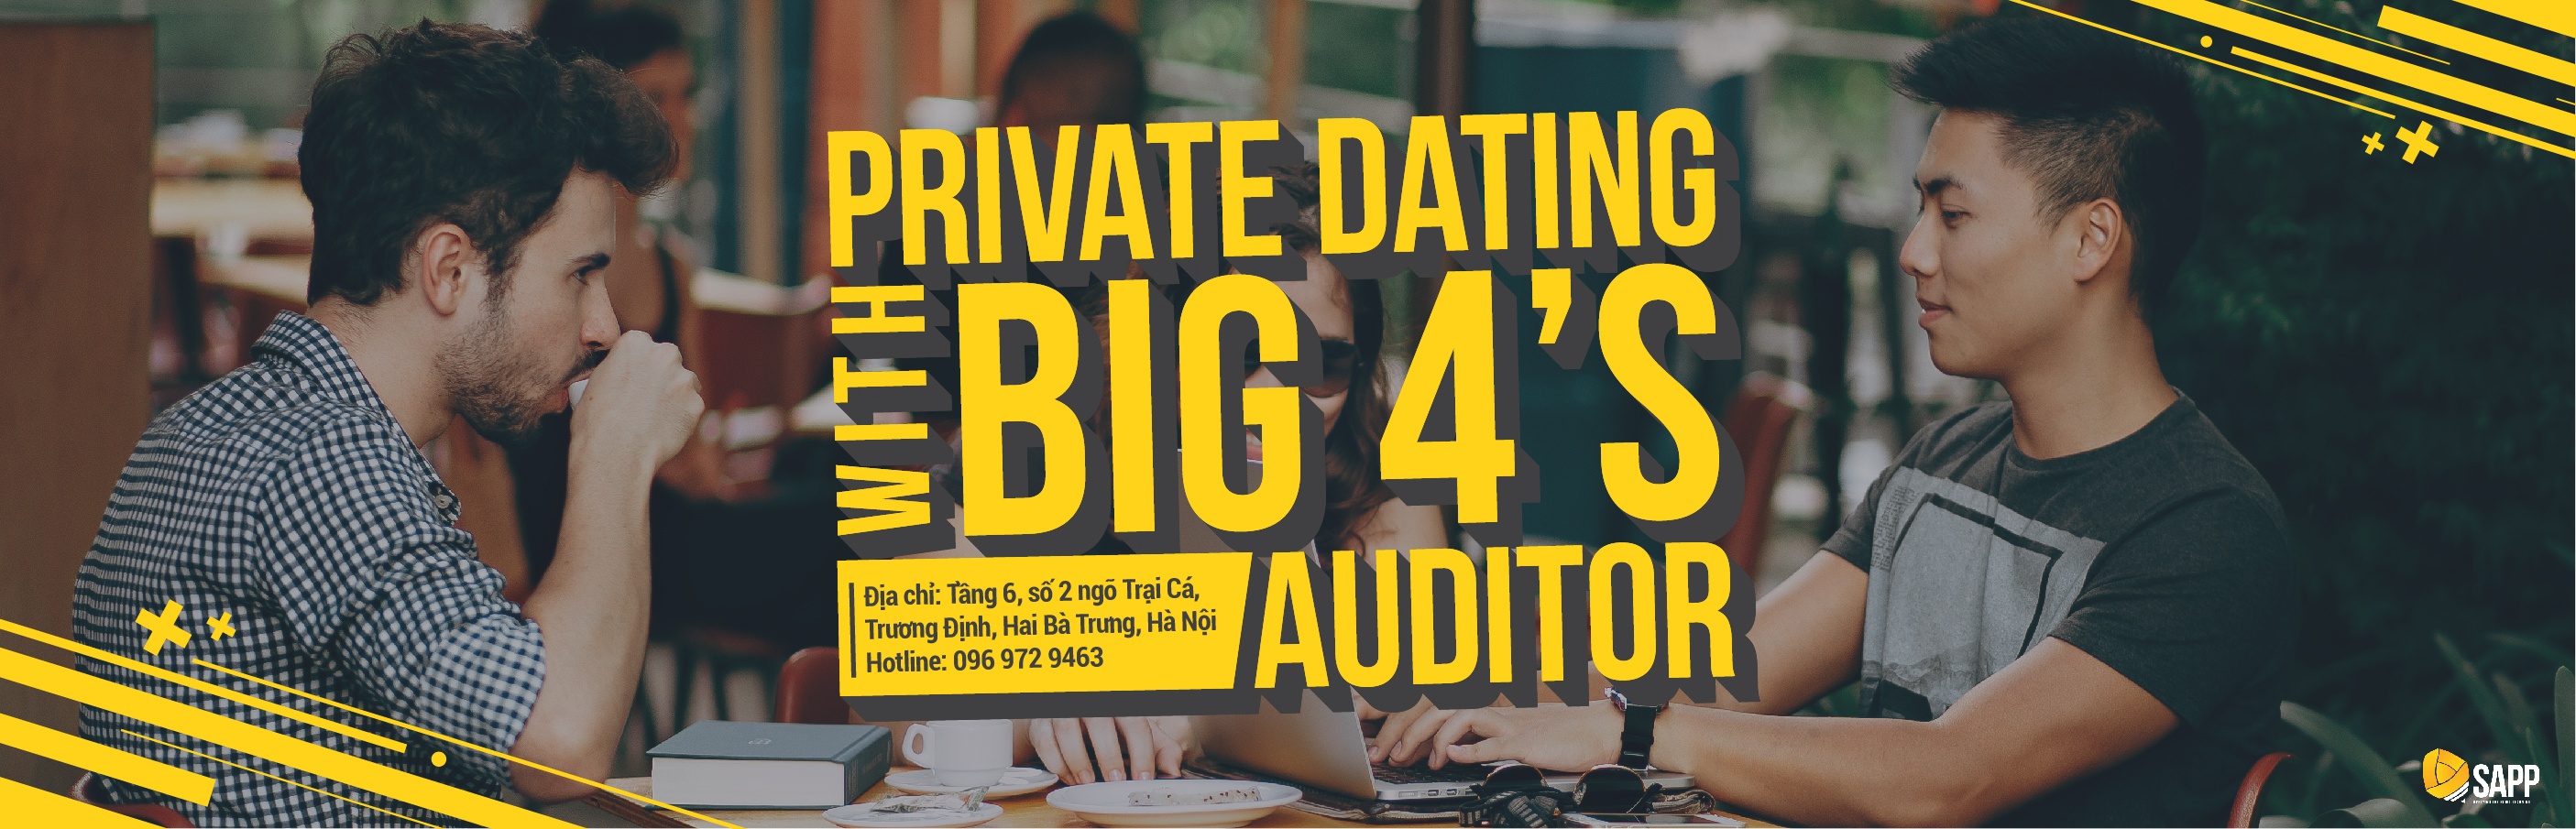 Private dating with a BIG4's auditor